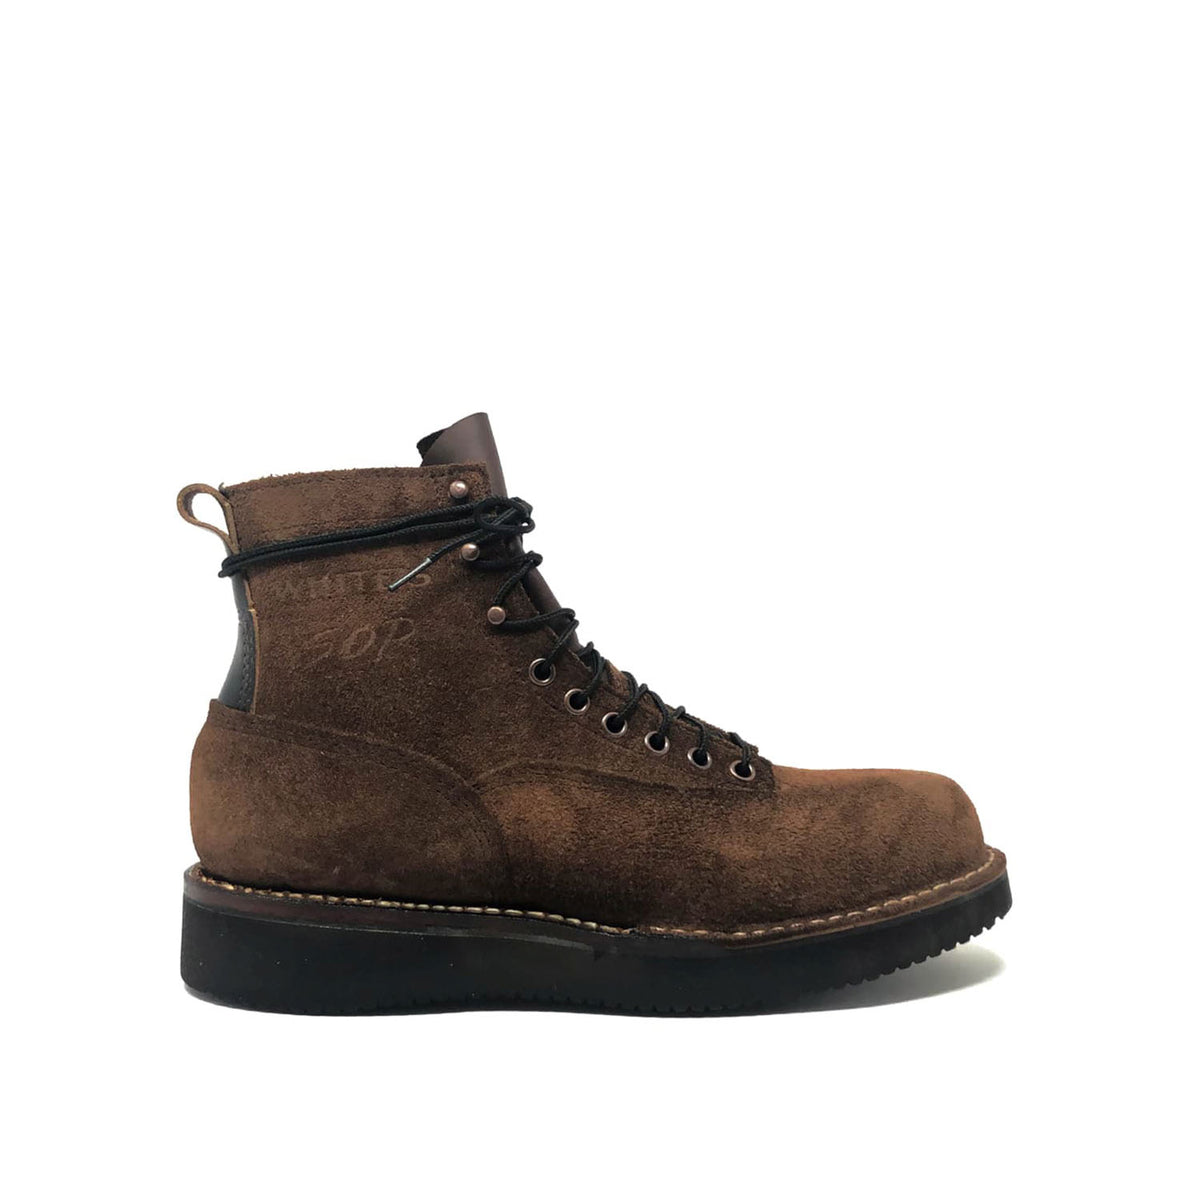 White's Boots x SOP Big Shooter Brown Roughout